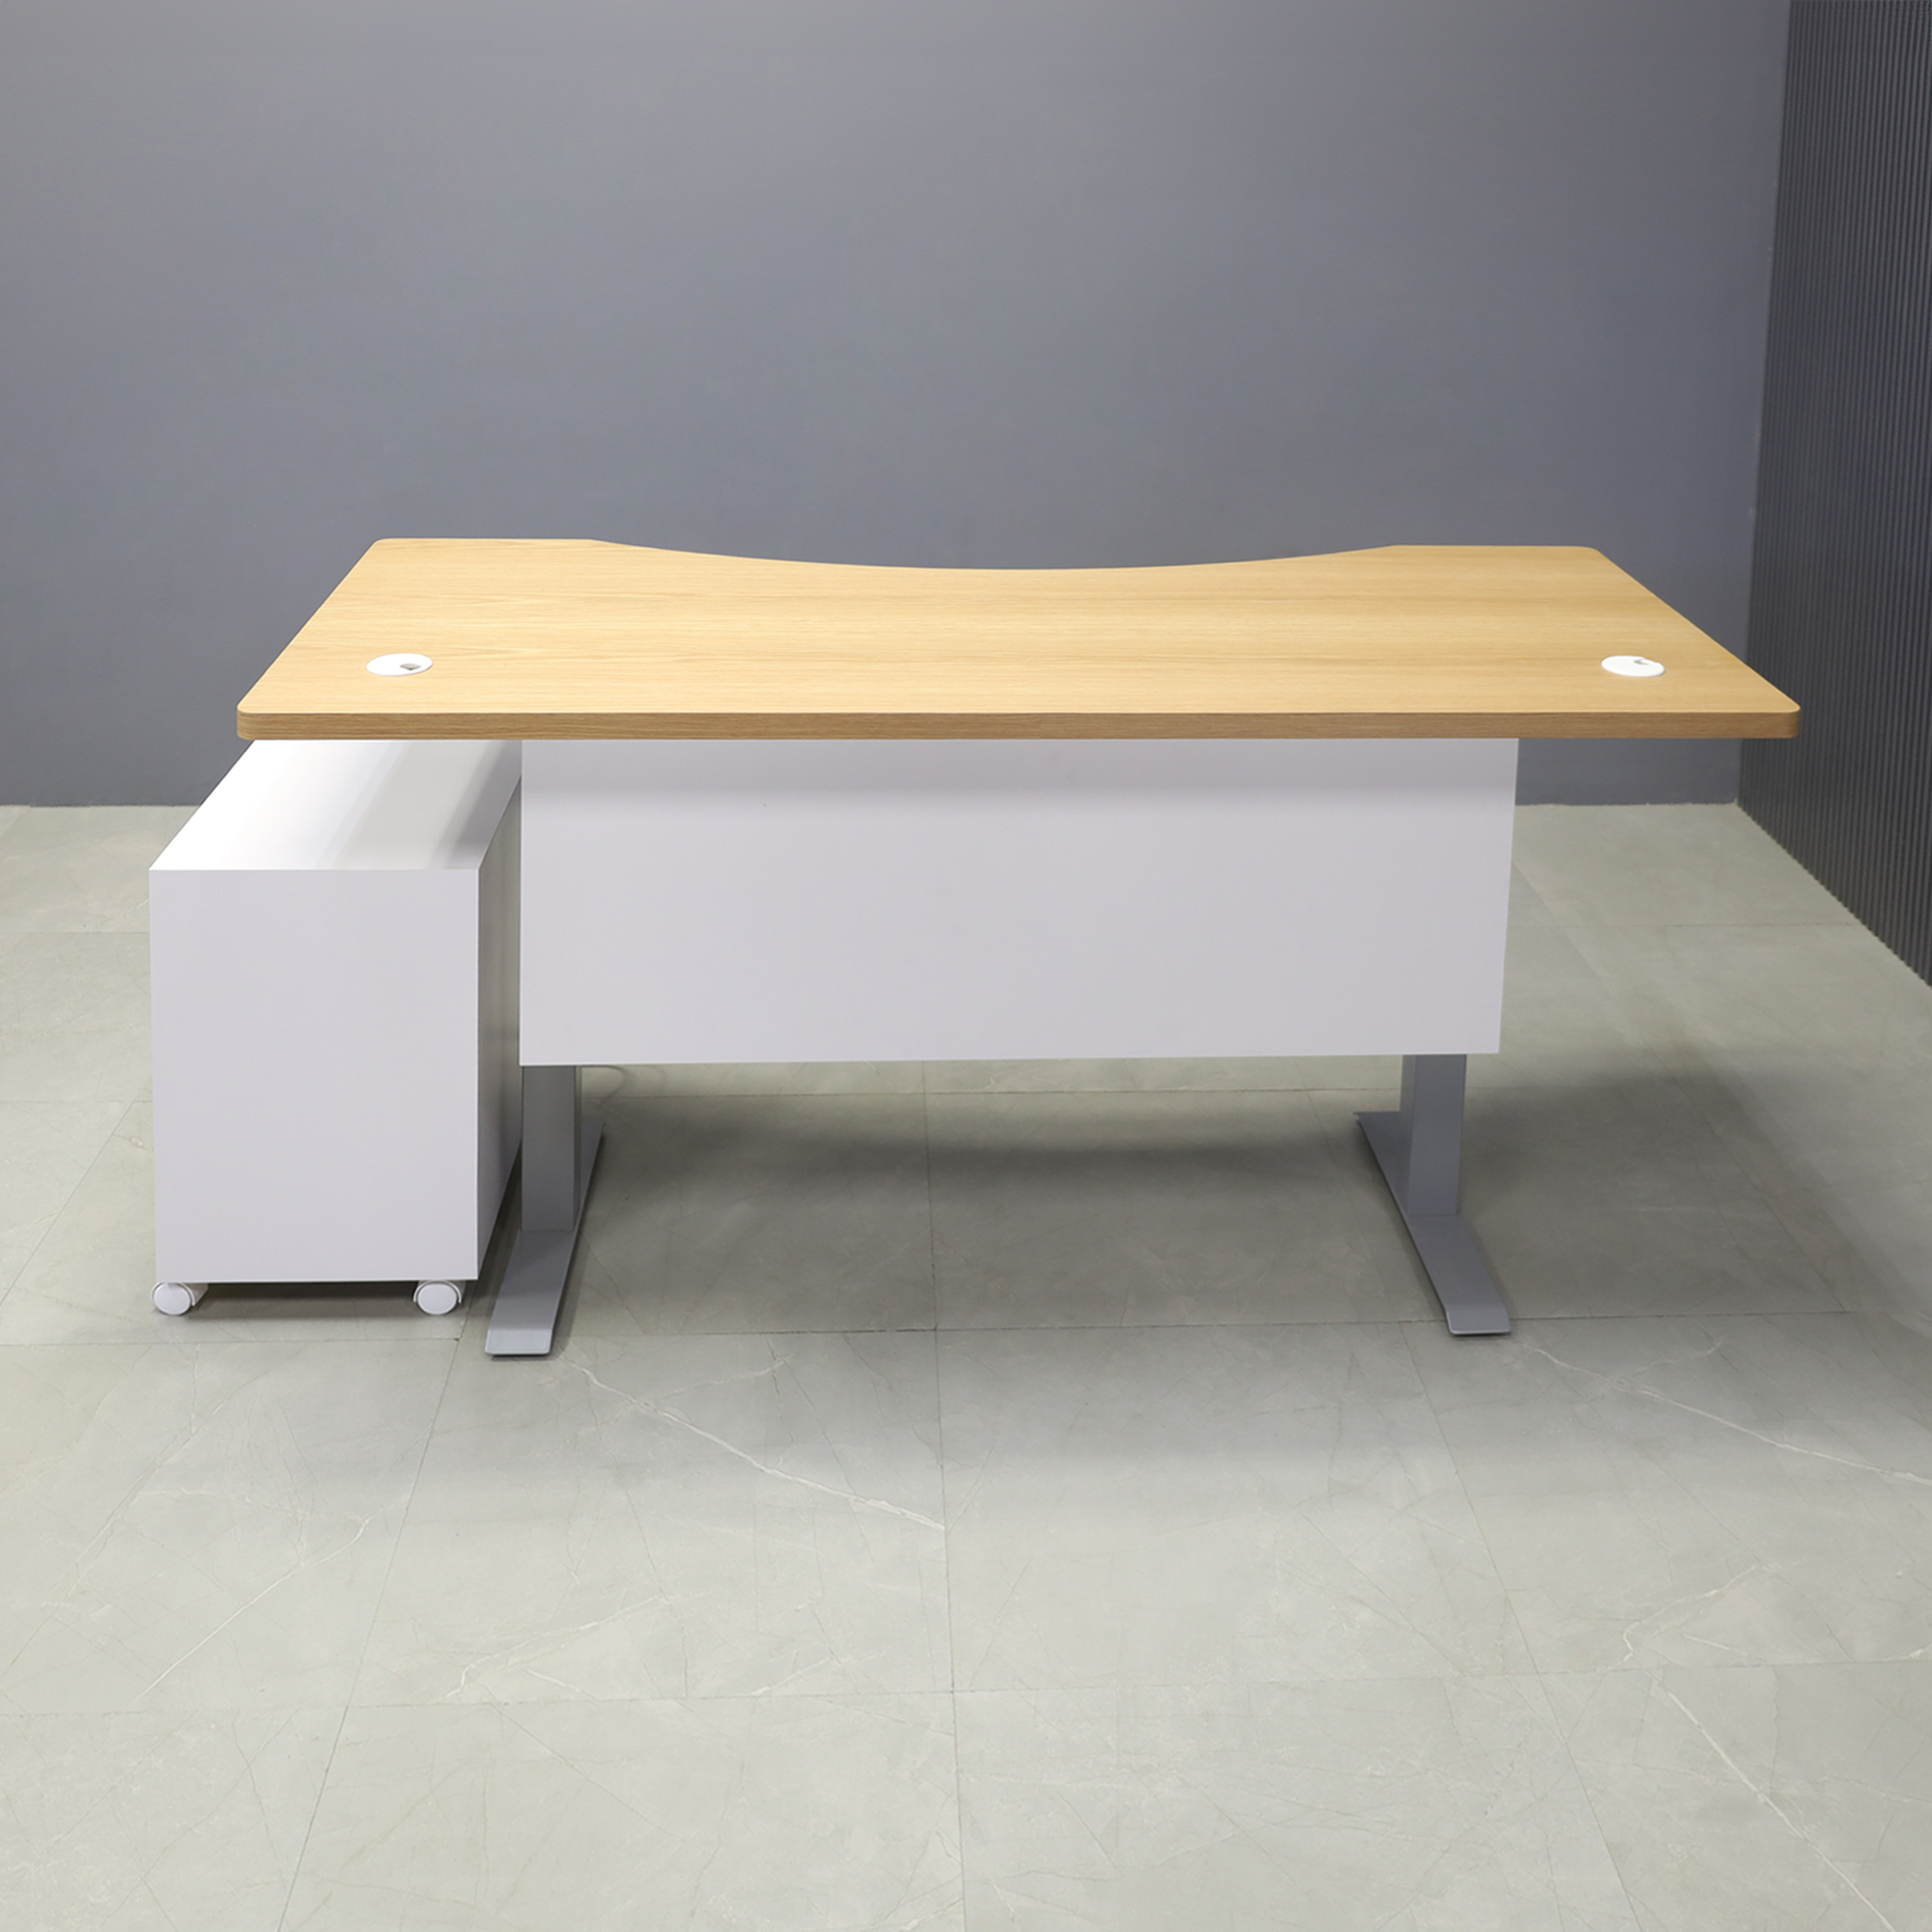 72-inch aXis Sit-stand Executive Desk in white oak veneer top, white matte laminate privacy panel and silver metal legs, with a white matte laminate mobile cabinet, shown here.